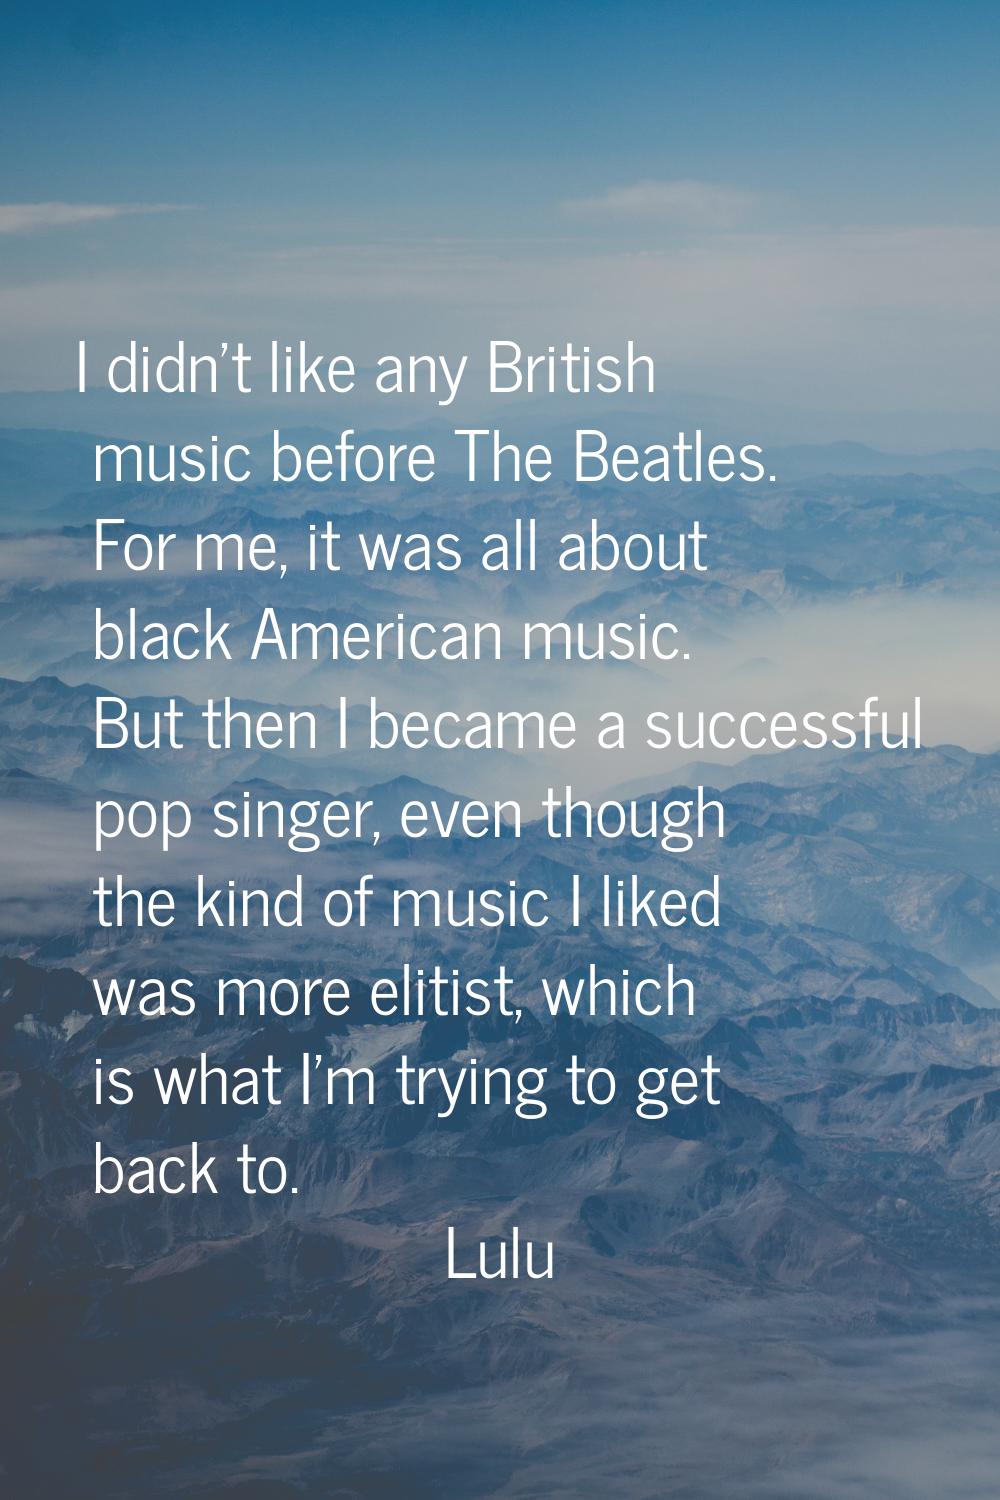 I didn't like any British music before The Beatles. For me, it was all about black American music. 